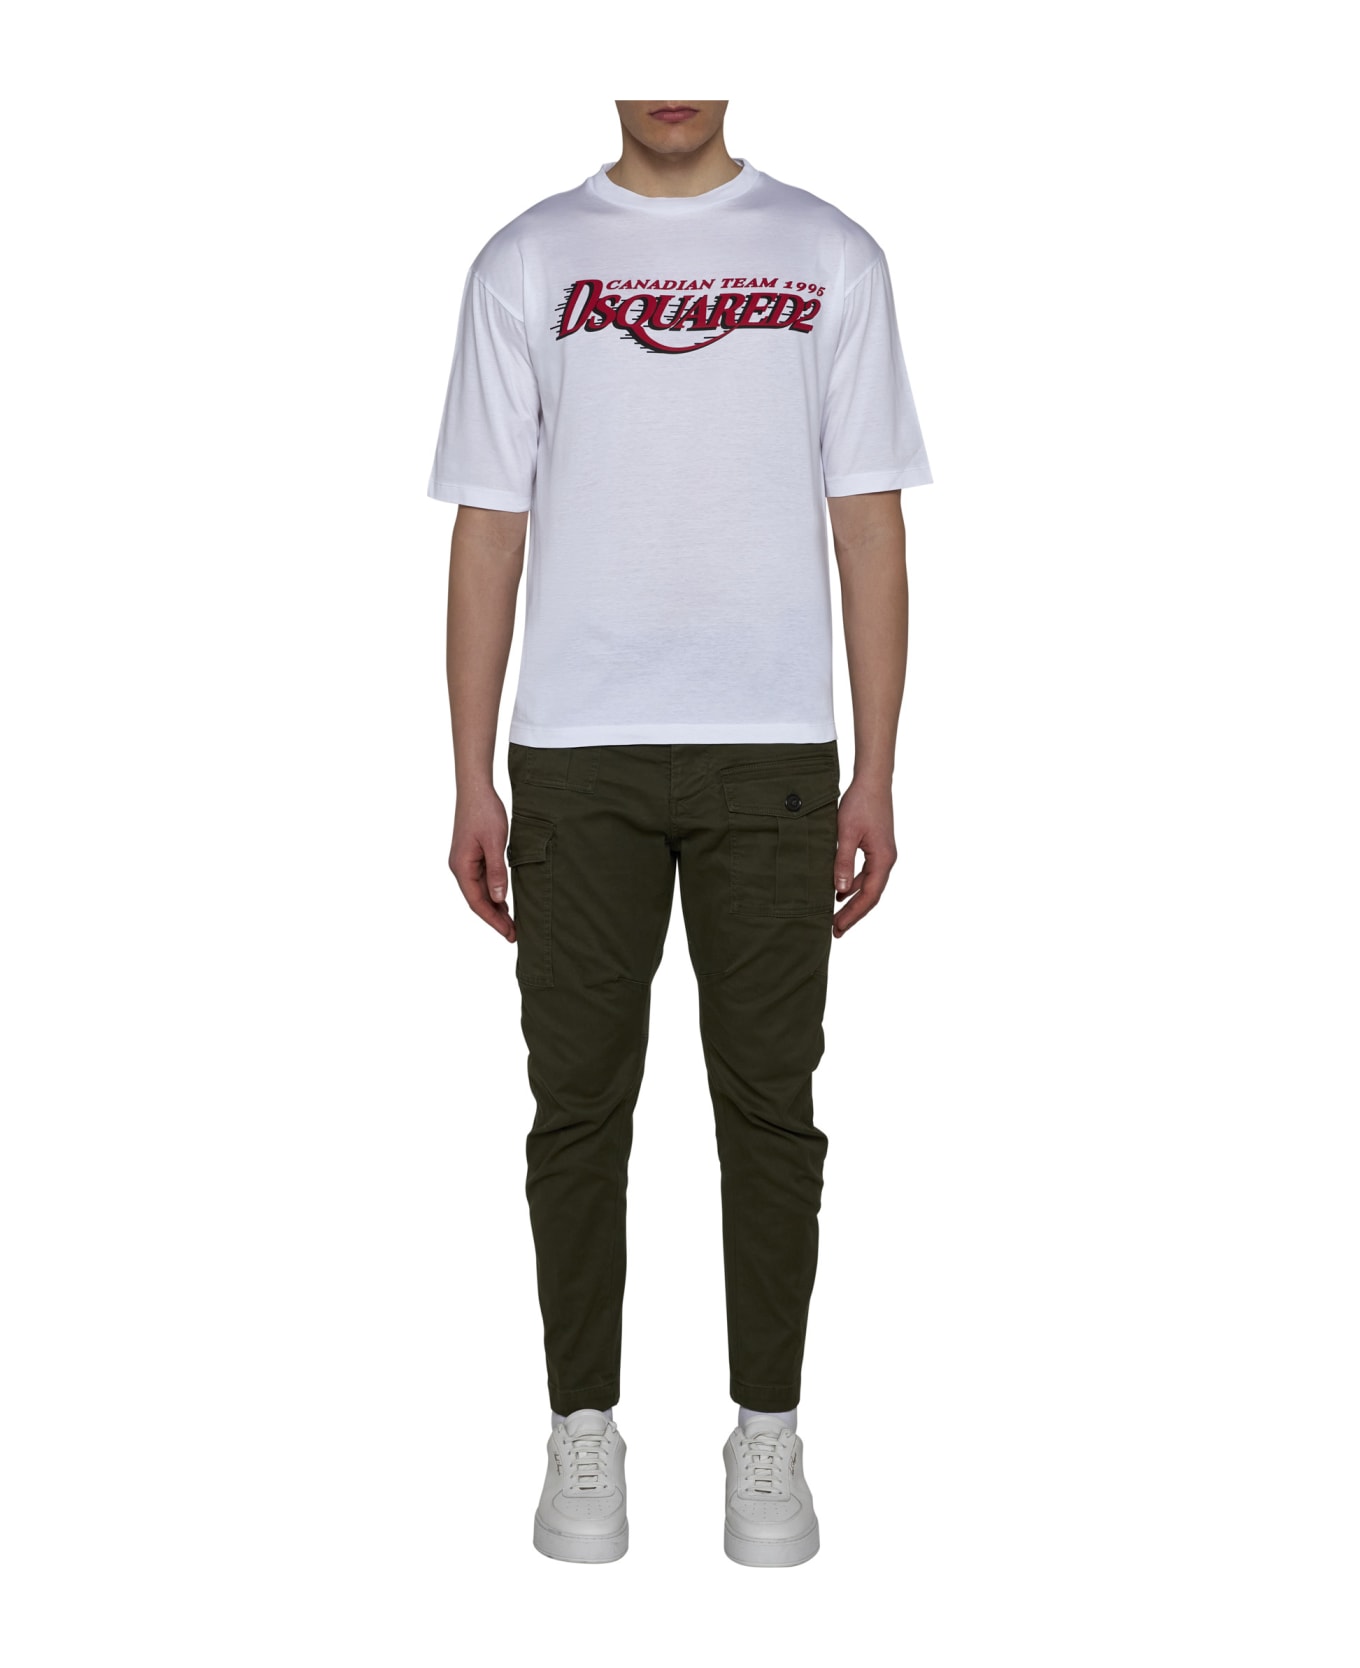 Dsquared2 Canadian Team Cool Fit T-shirt - White